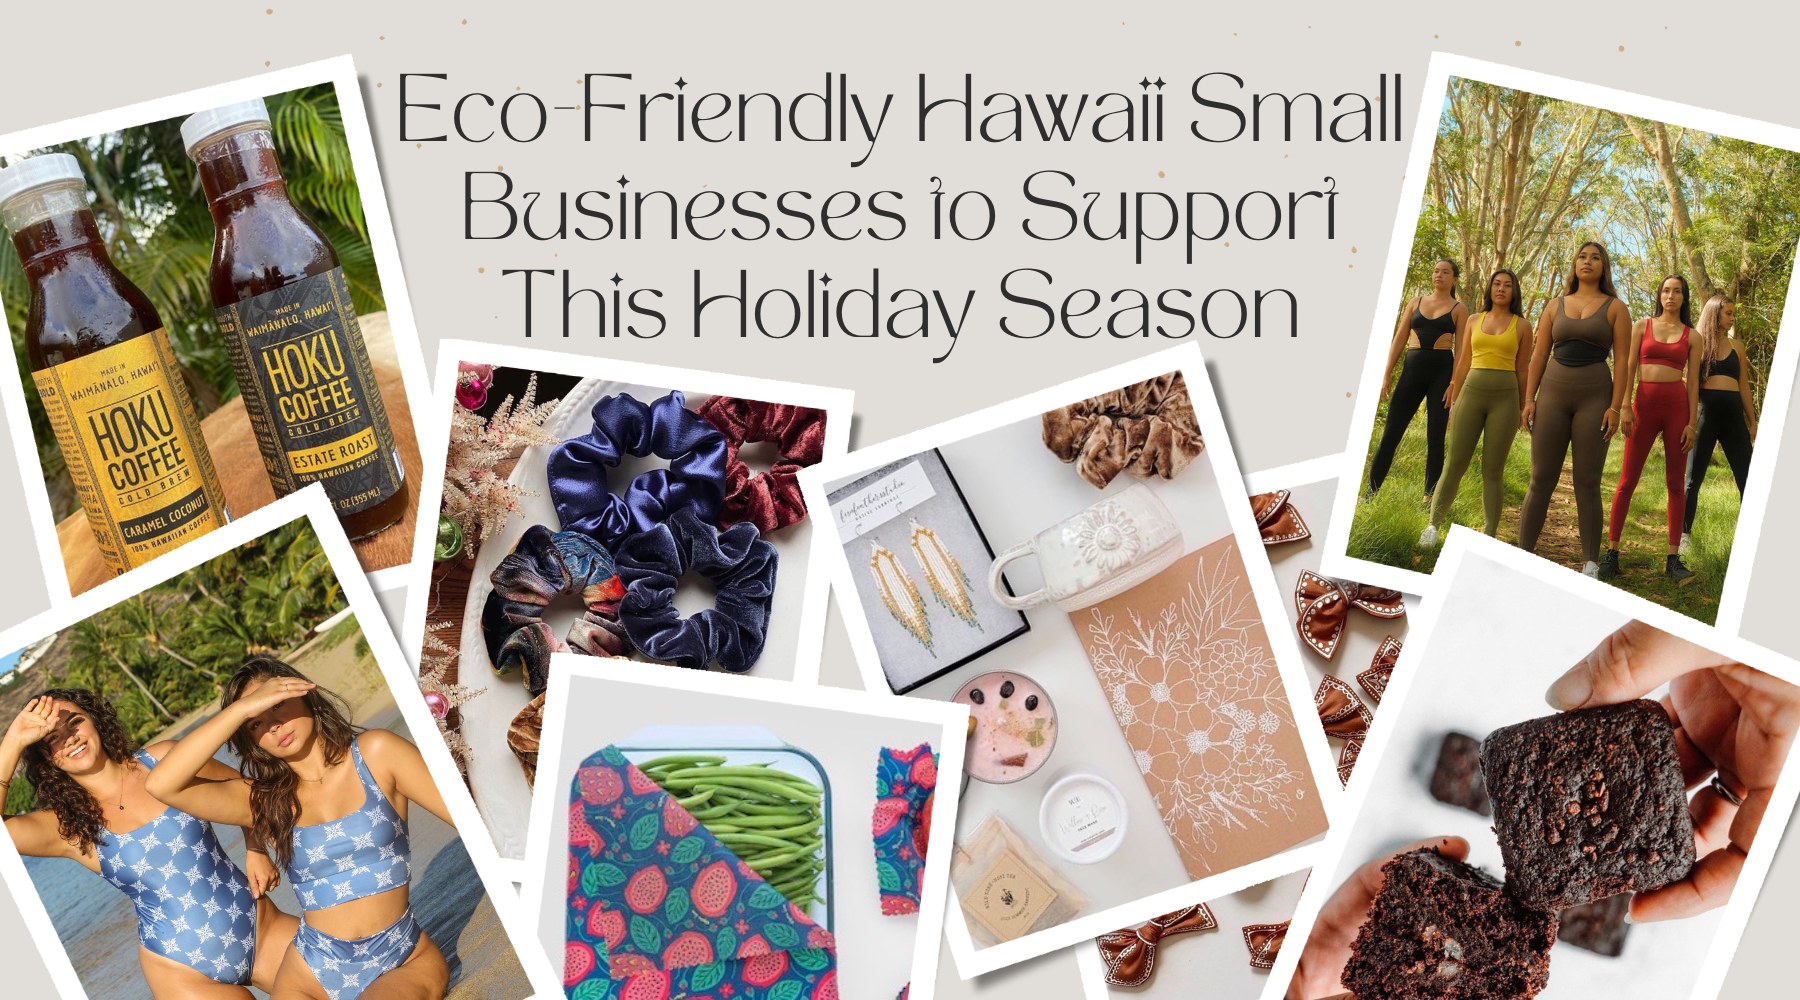 Eco-Friendly Hawaii Small Businesses to Support This Holiday Season